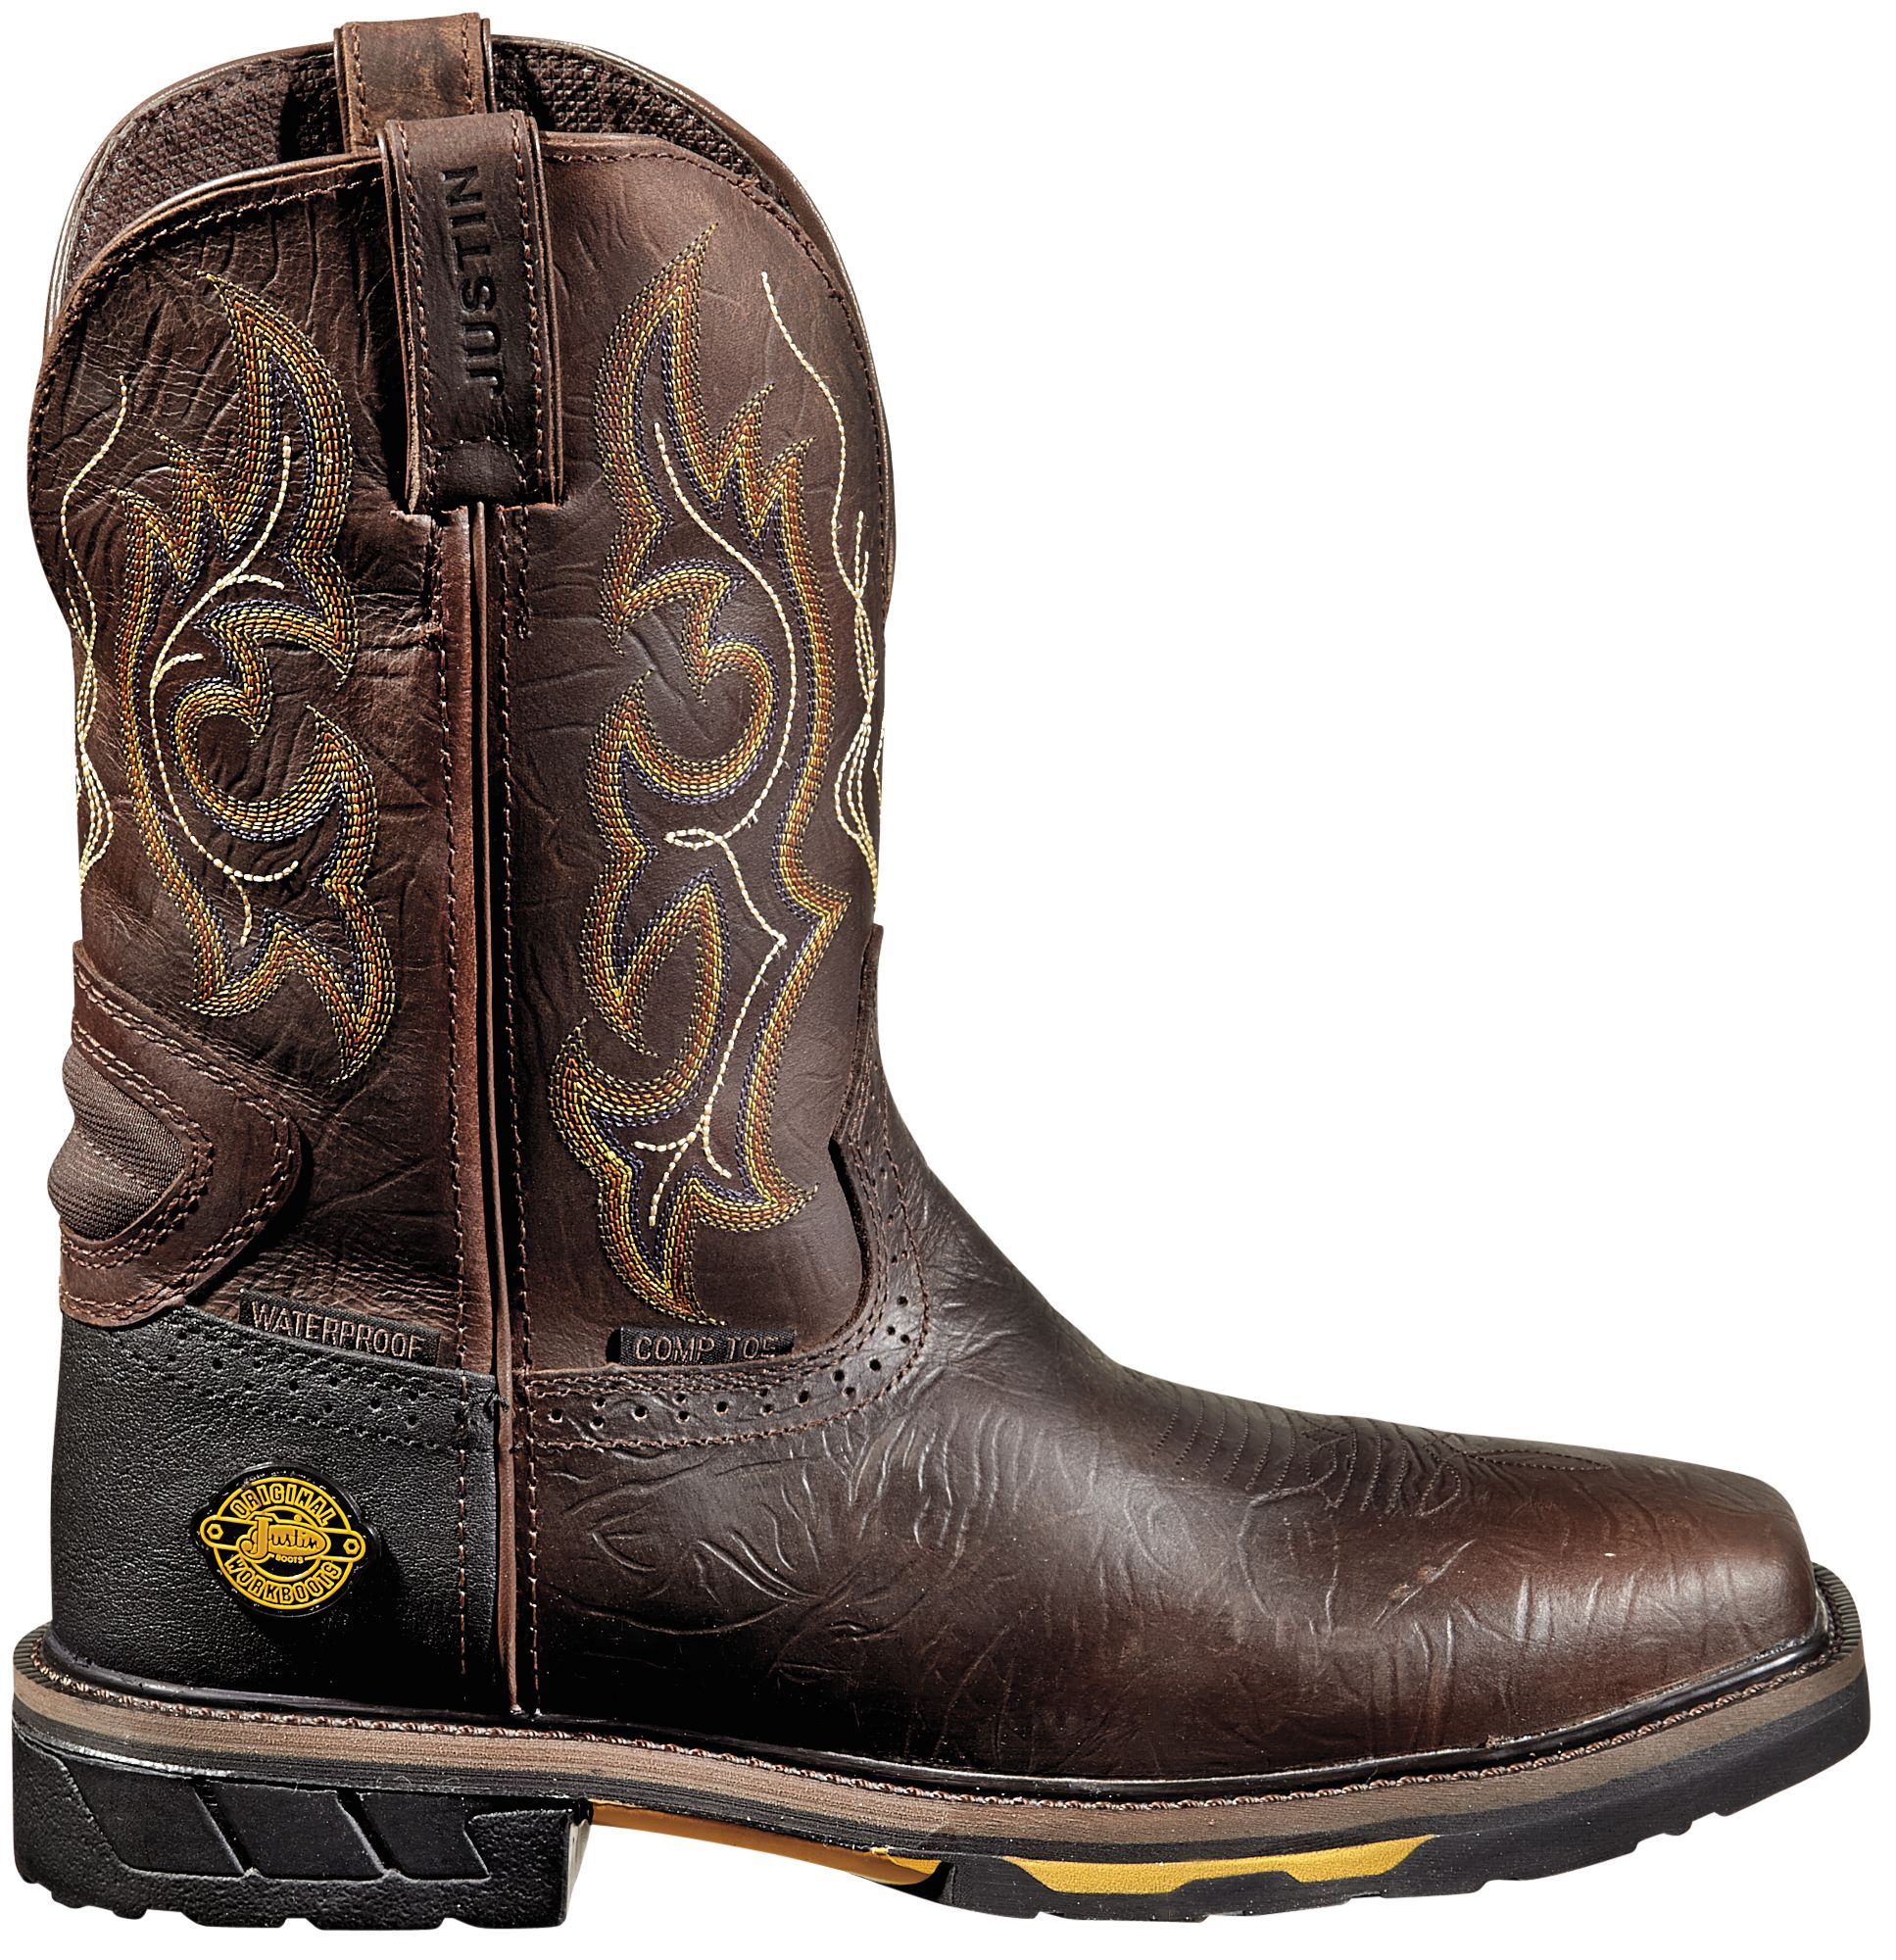 justin boots wk4625